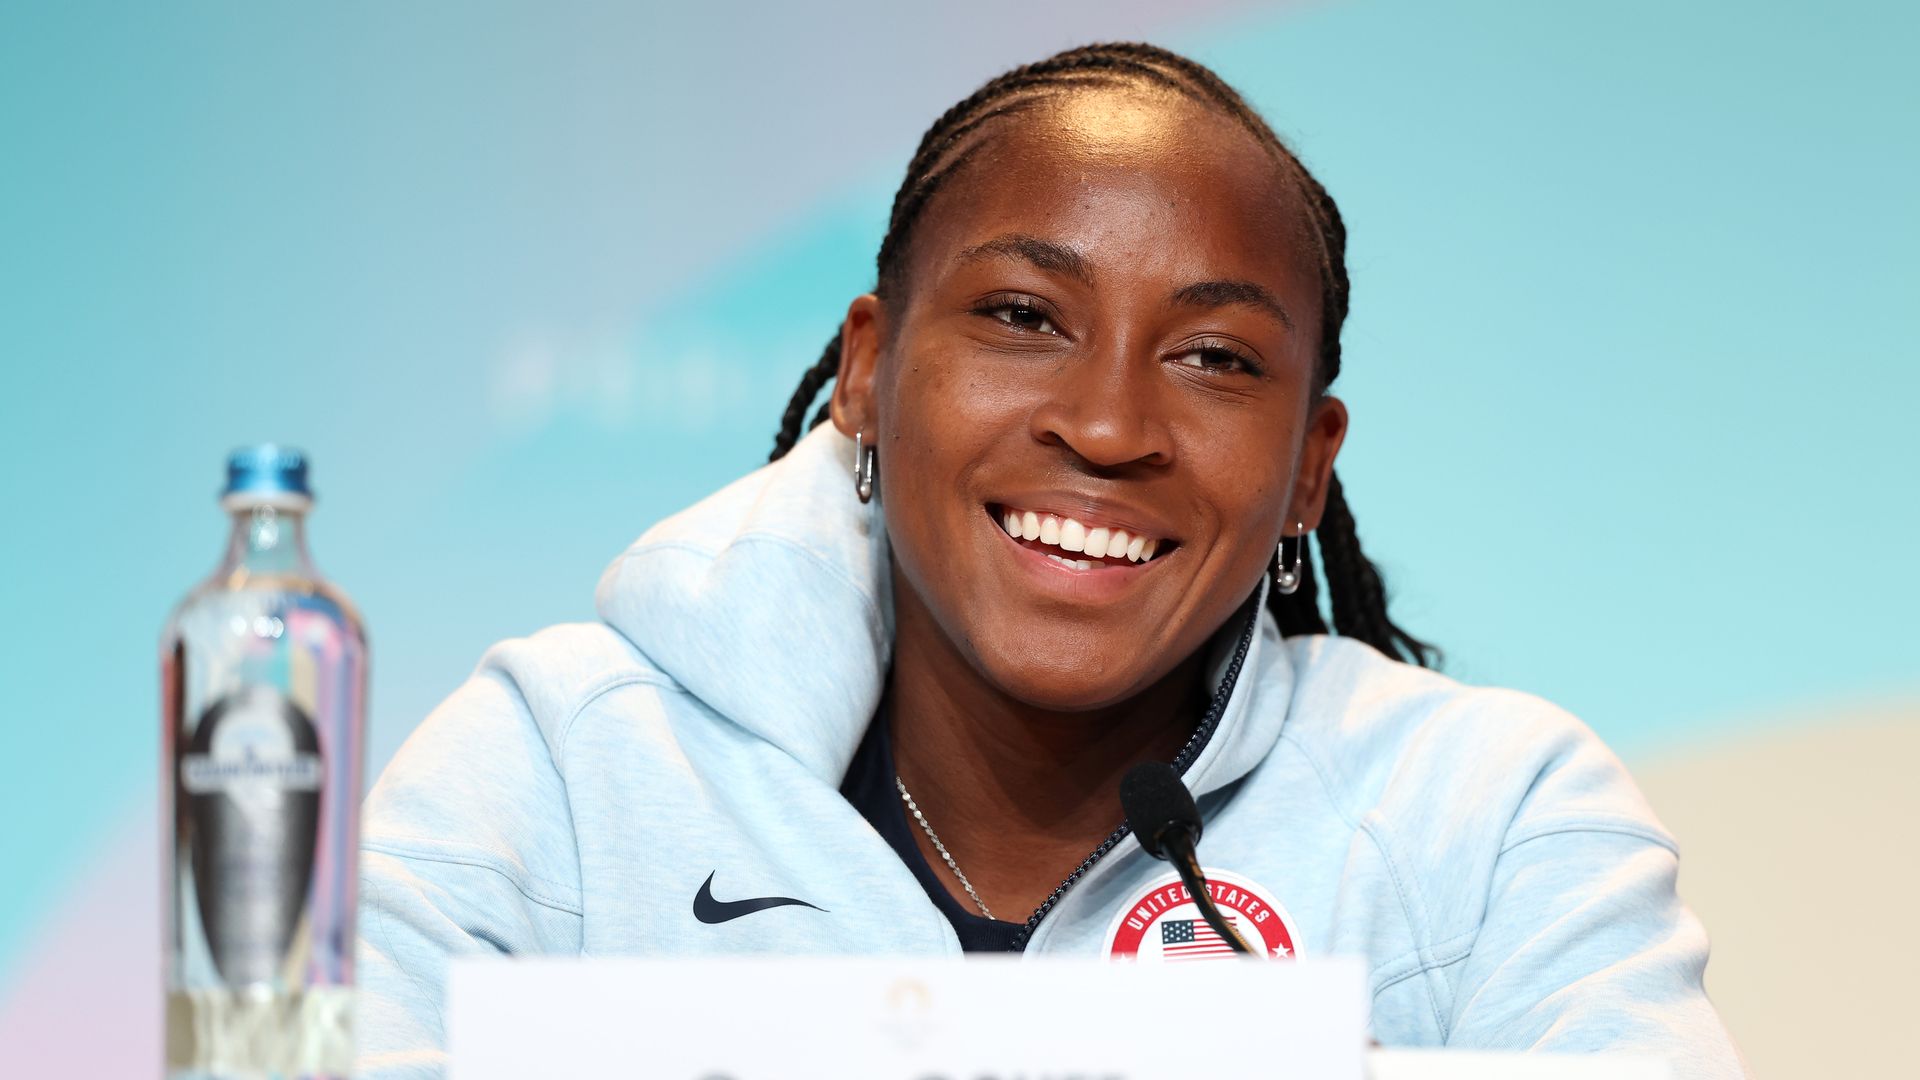 Why Coco Gauff was not happy with the Olympic Village living conditions